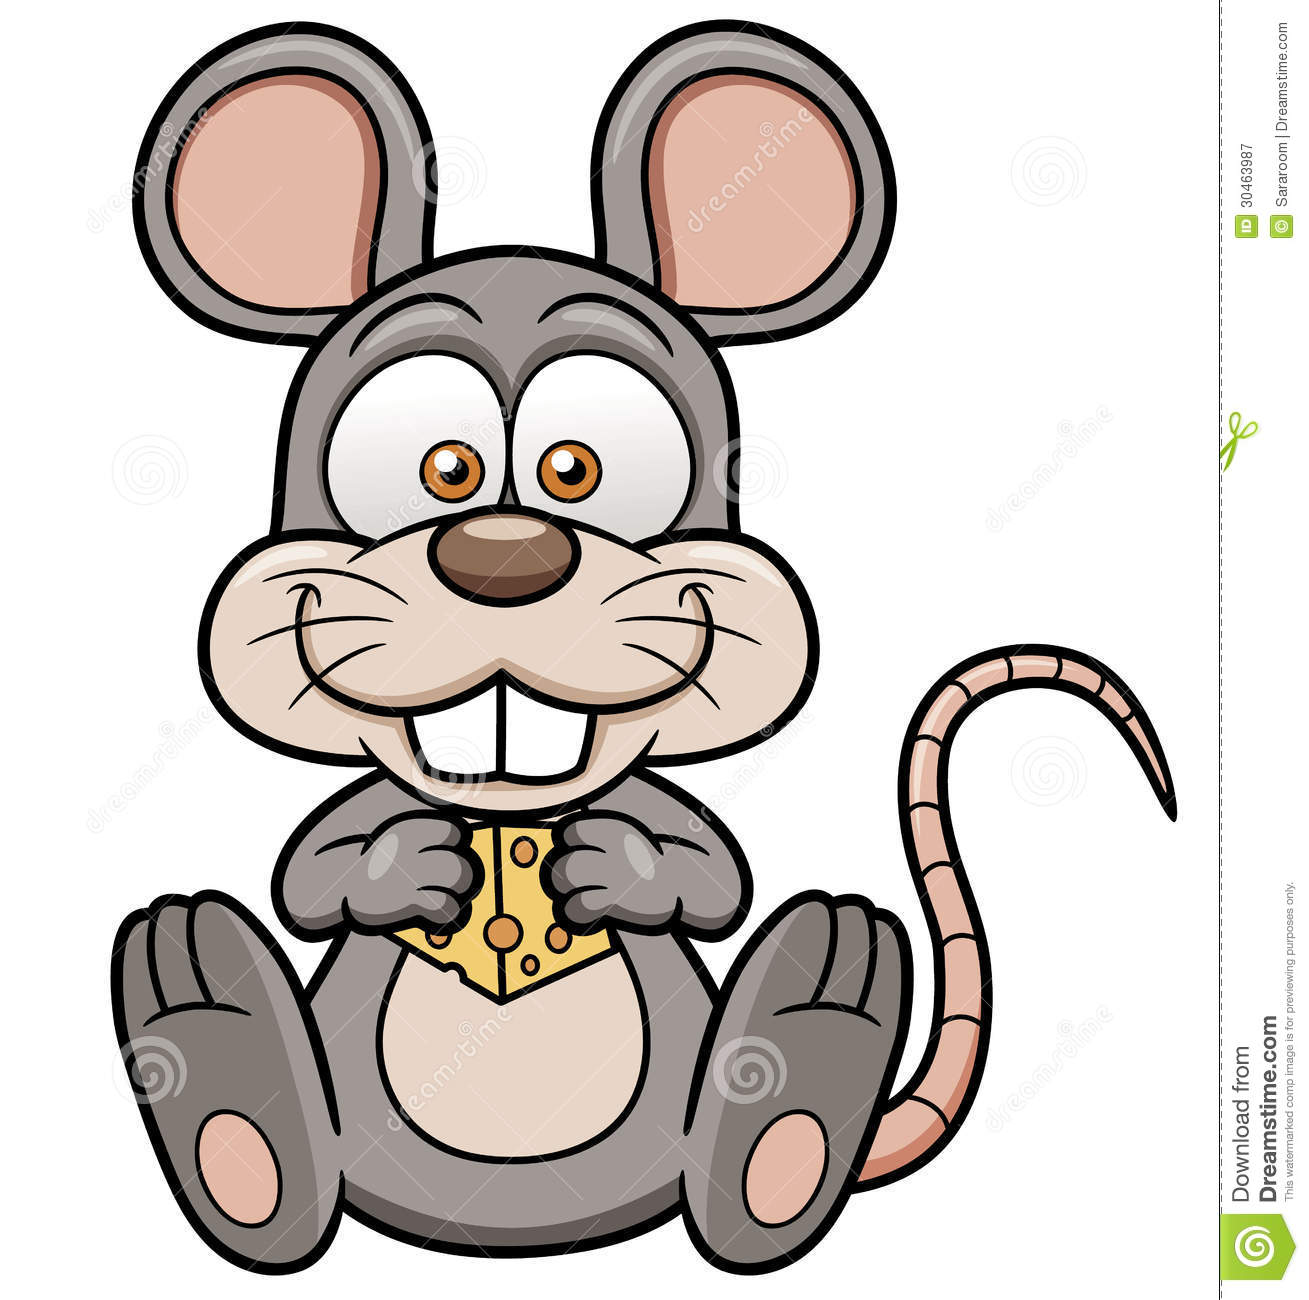 Cartoon Rat With Cheese Royalty Free Stock Photography   Image    